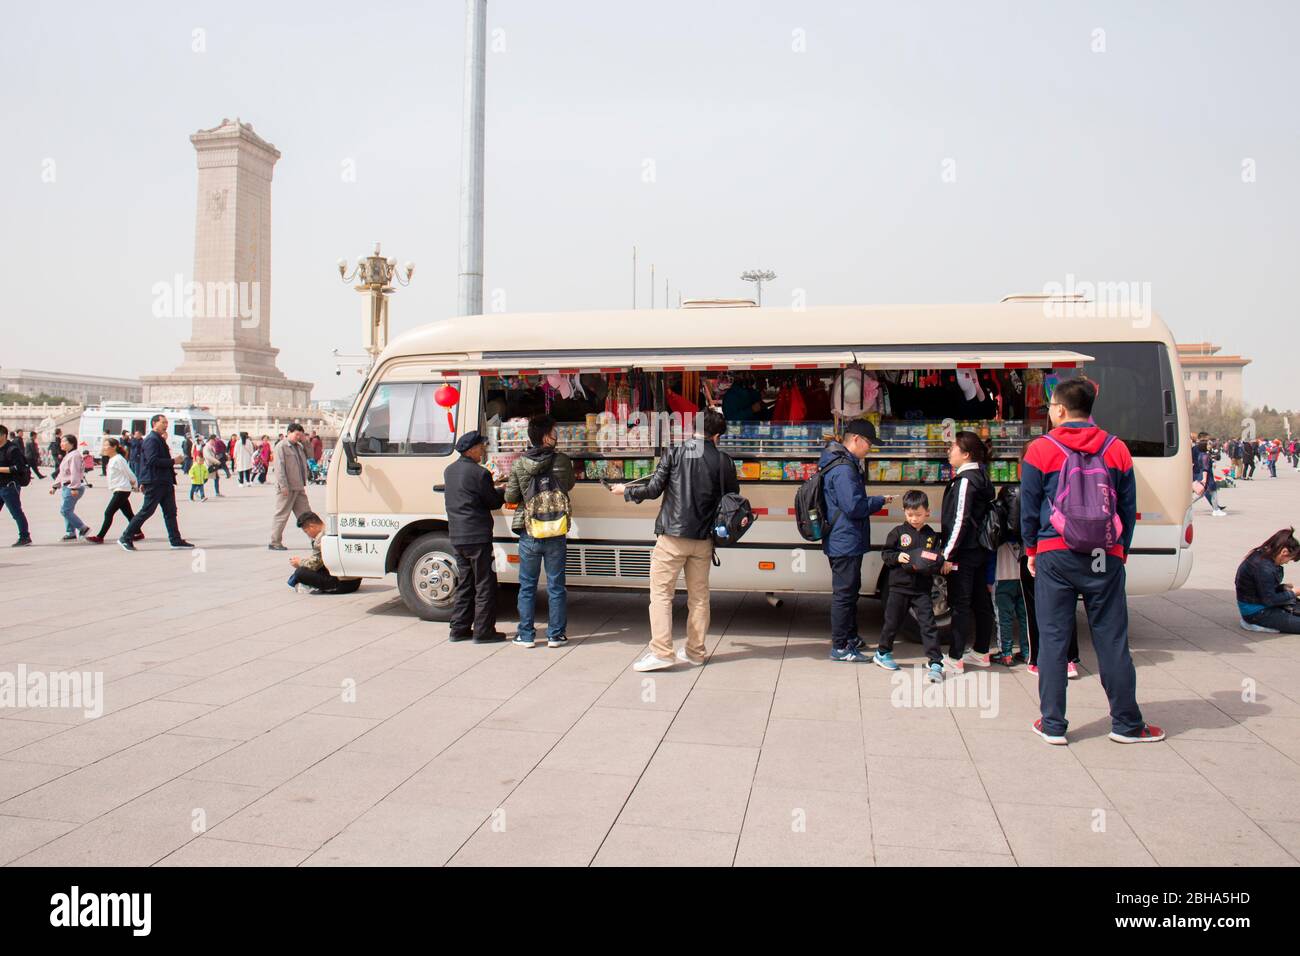 Chinese Food Truck, Monument to People's Heroes in the background, Heavenly Square, Beijing, China Stock Photo